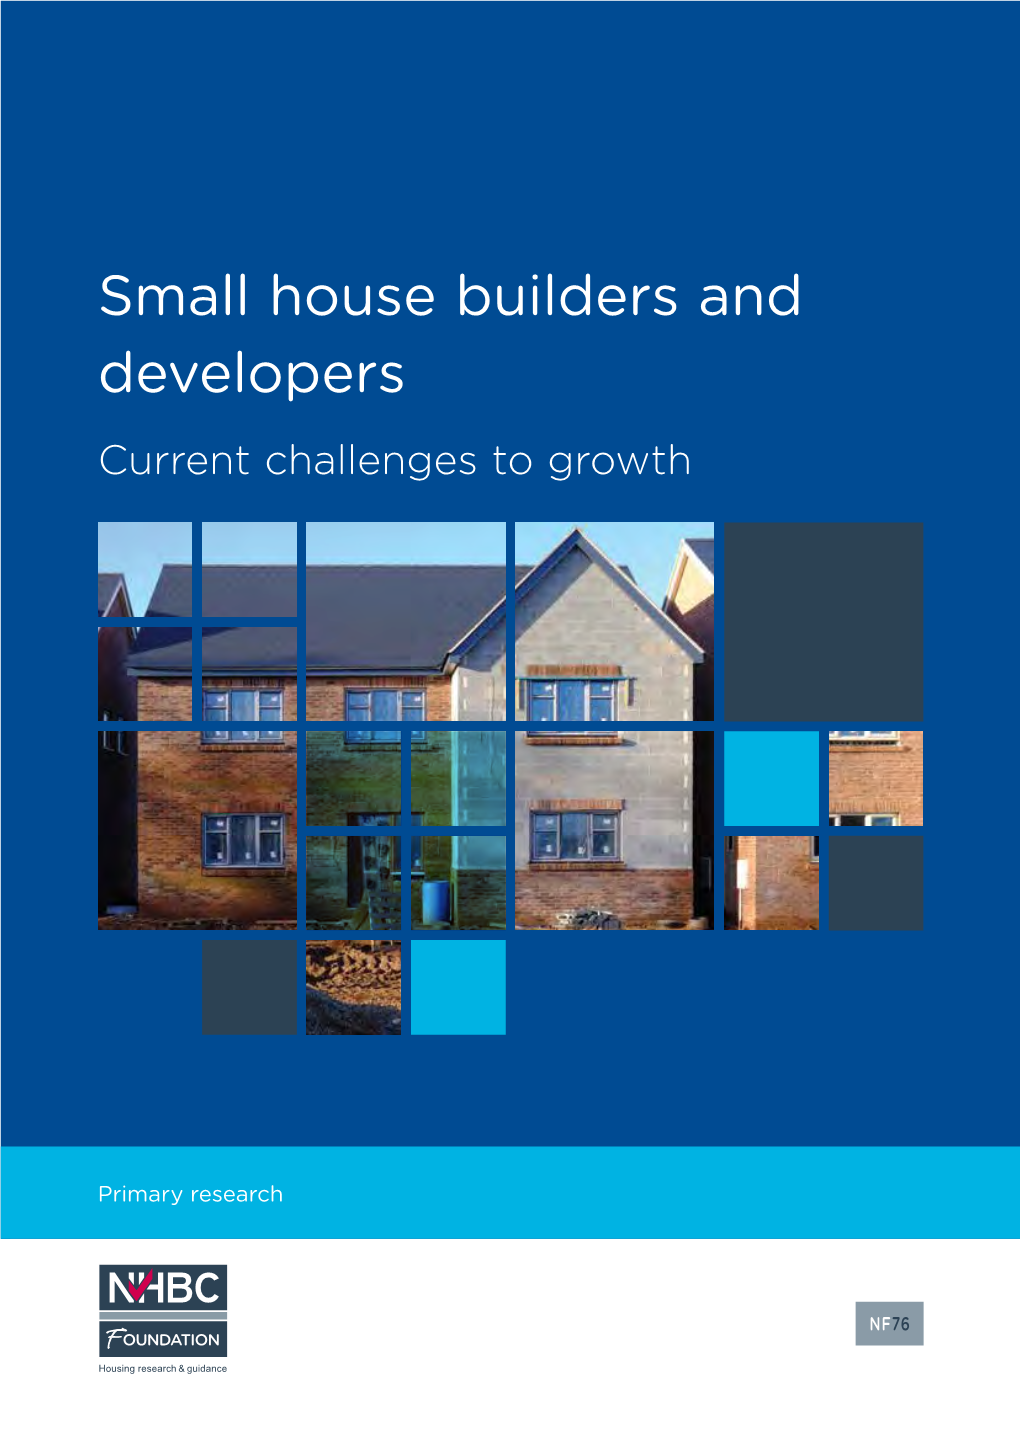 Small House Builders and Developers Current Challenges to Growth